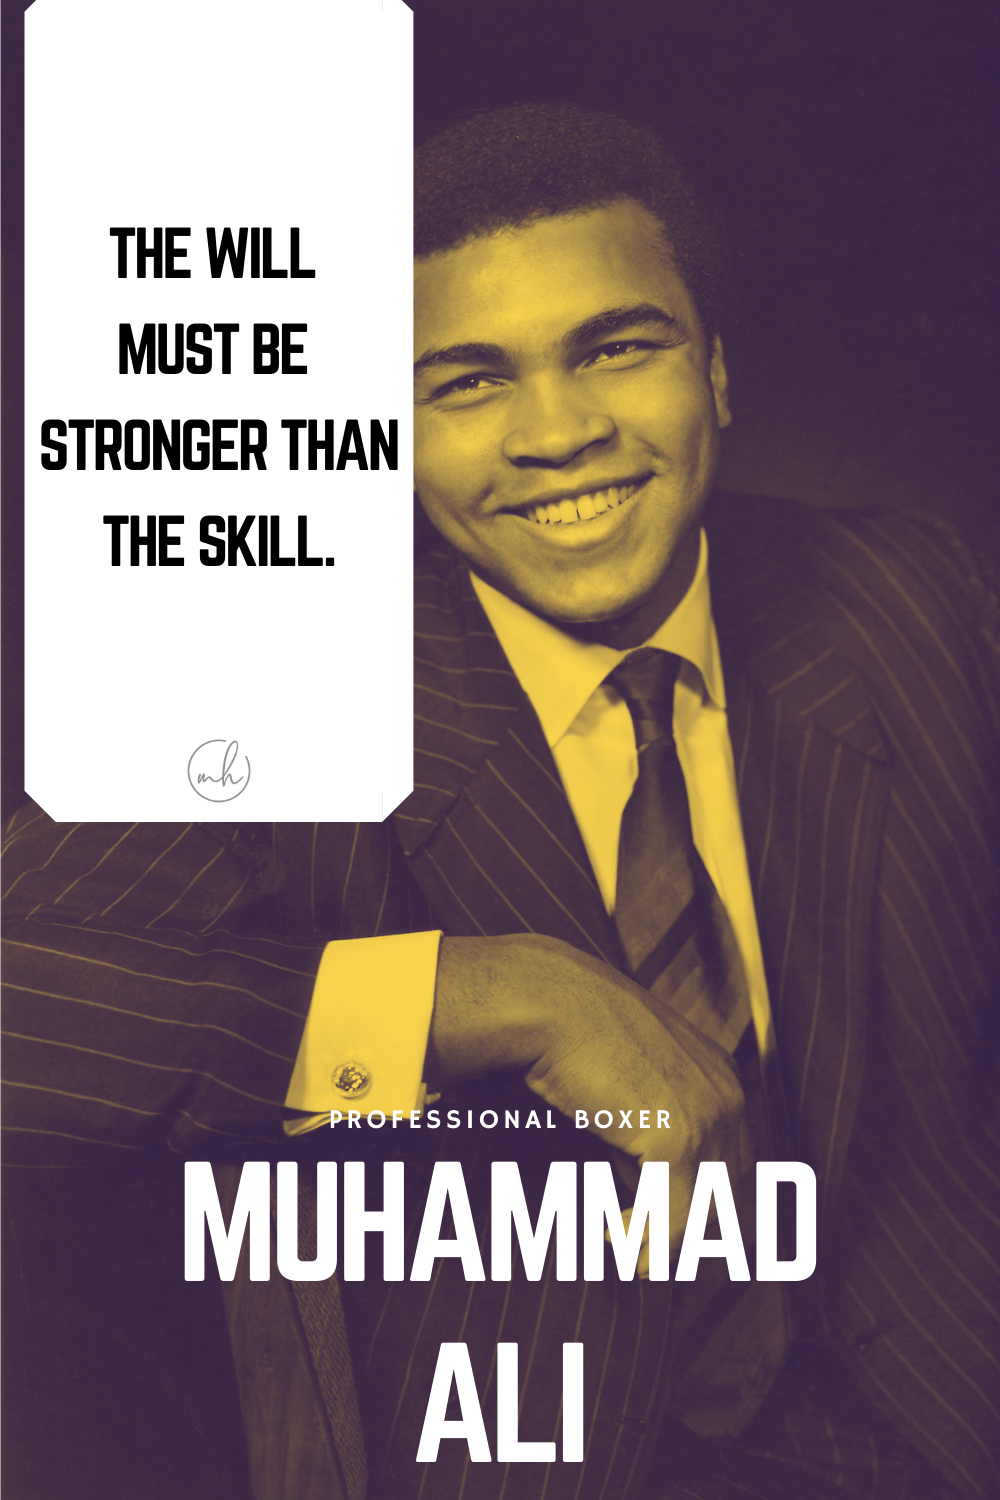 "The will must be stronger than the skill." - Muhammad Ali